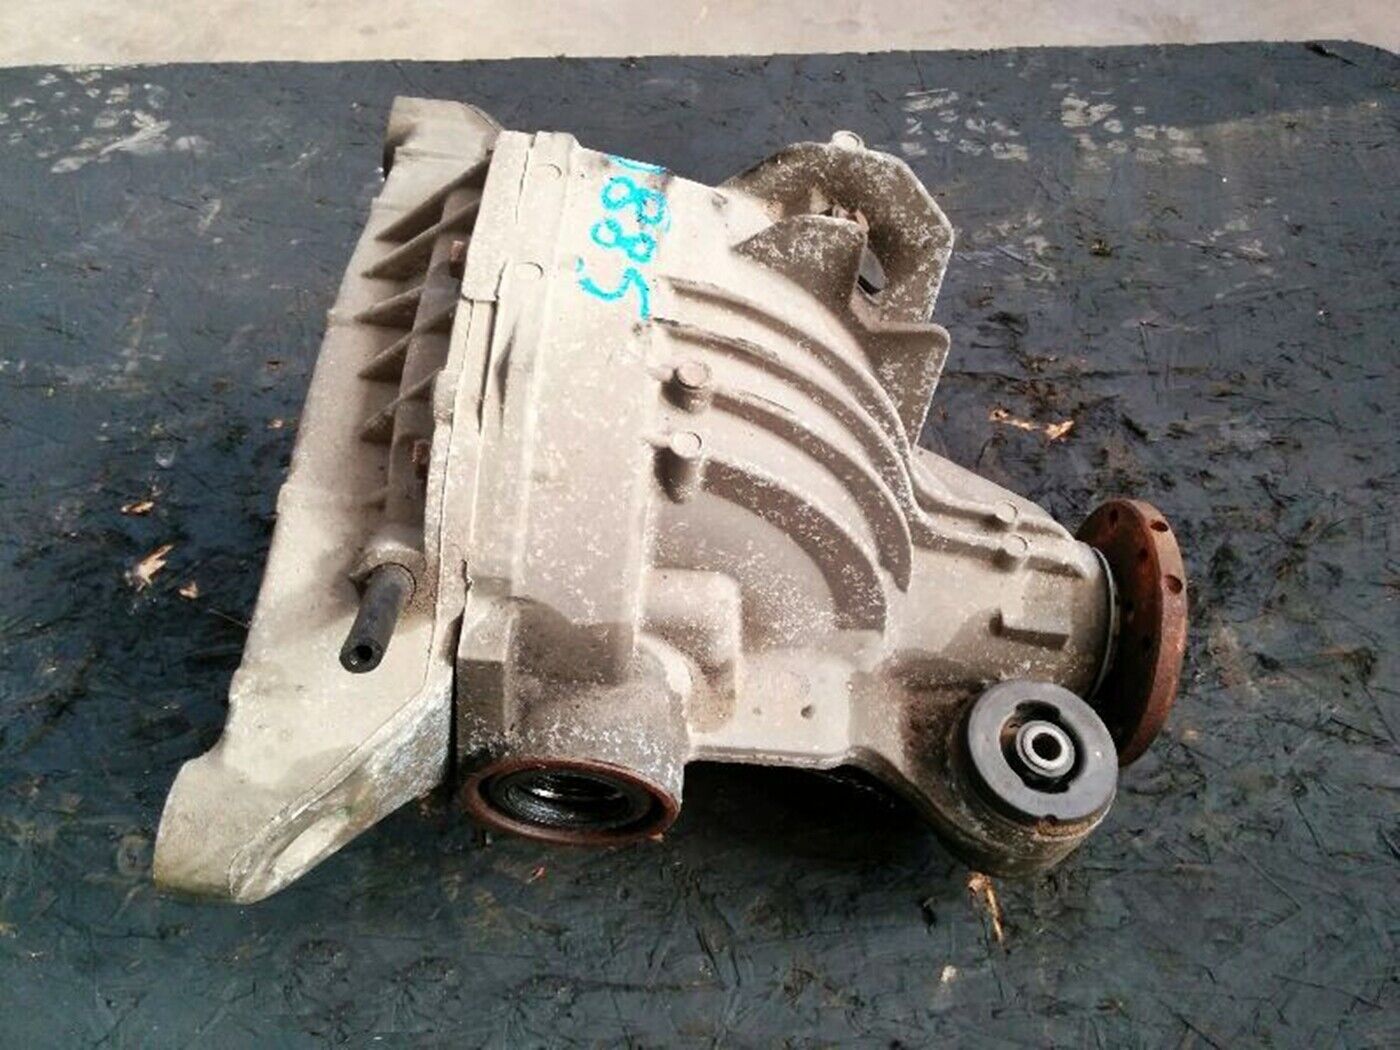 Used 2003-2005 Ford Explorer Rear Axle Differential Carrier 3.73 Ratio 2003 Ford Explorer Rear Differential Fluid Change